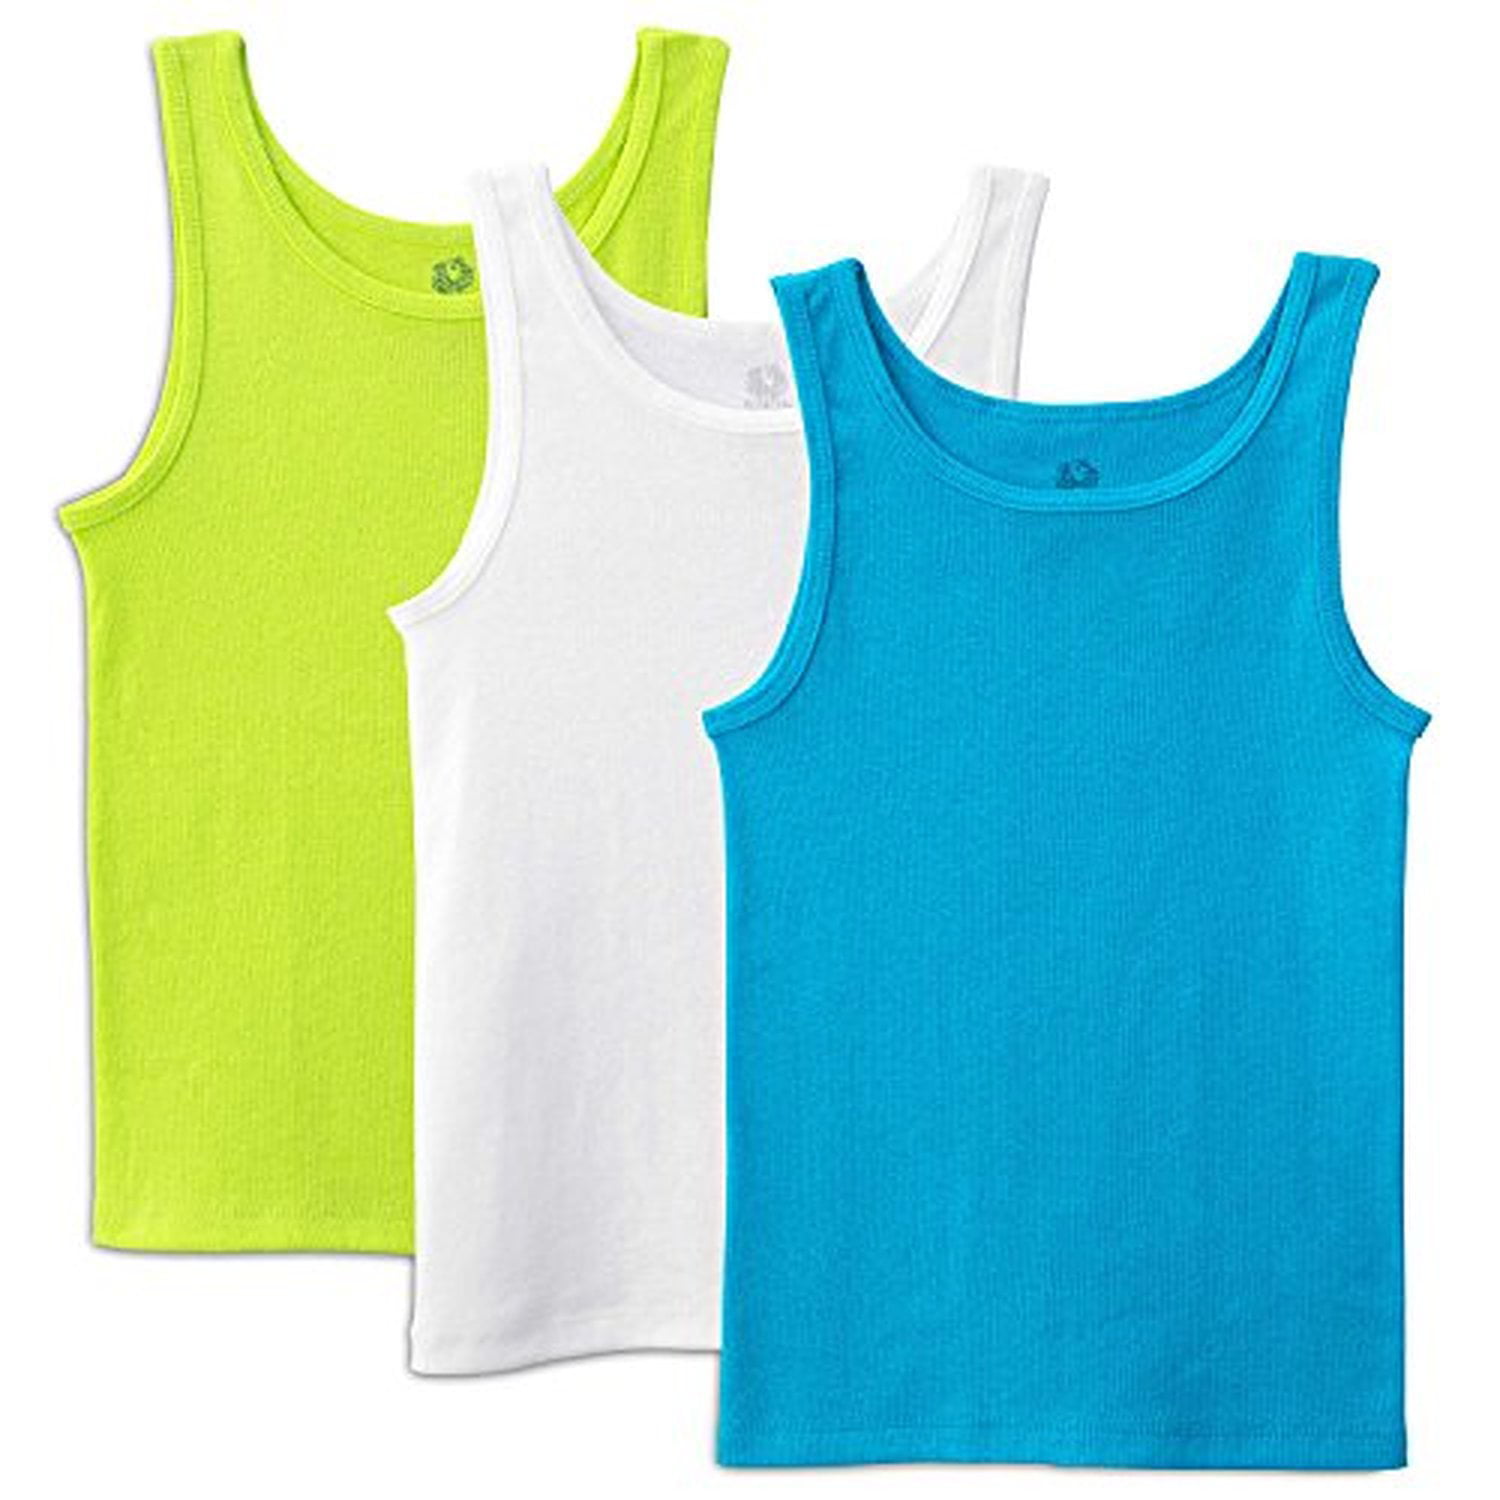 Fruit of the Loom Toddler Girls` 3 Pack Wardrobe Tank, 4T/5T, Assorted